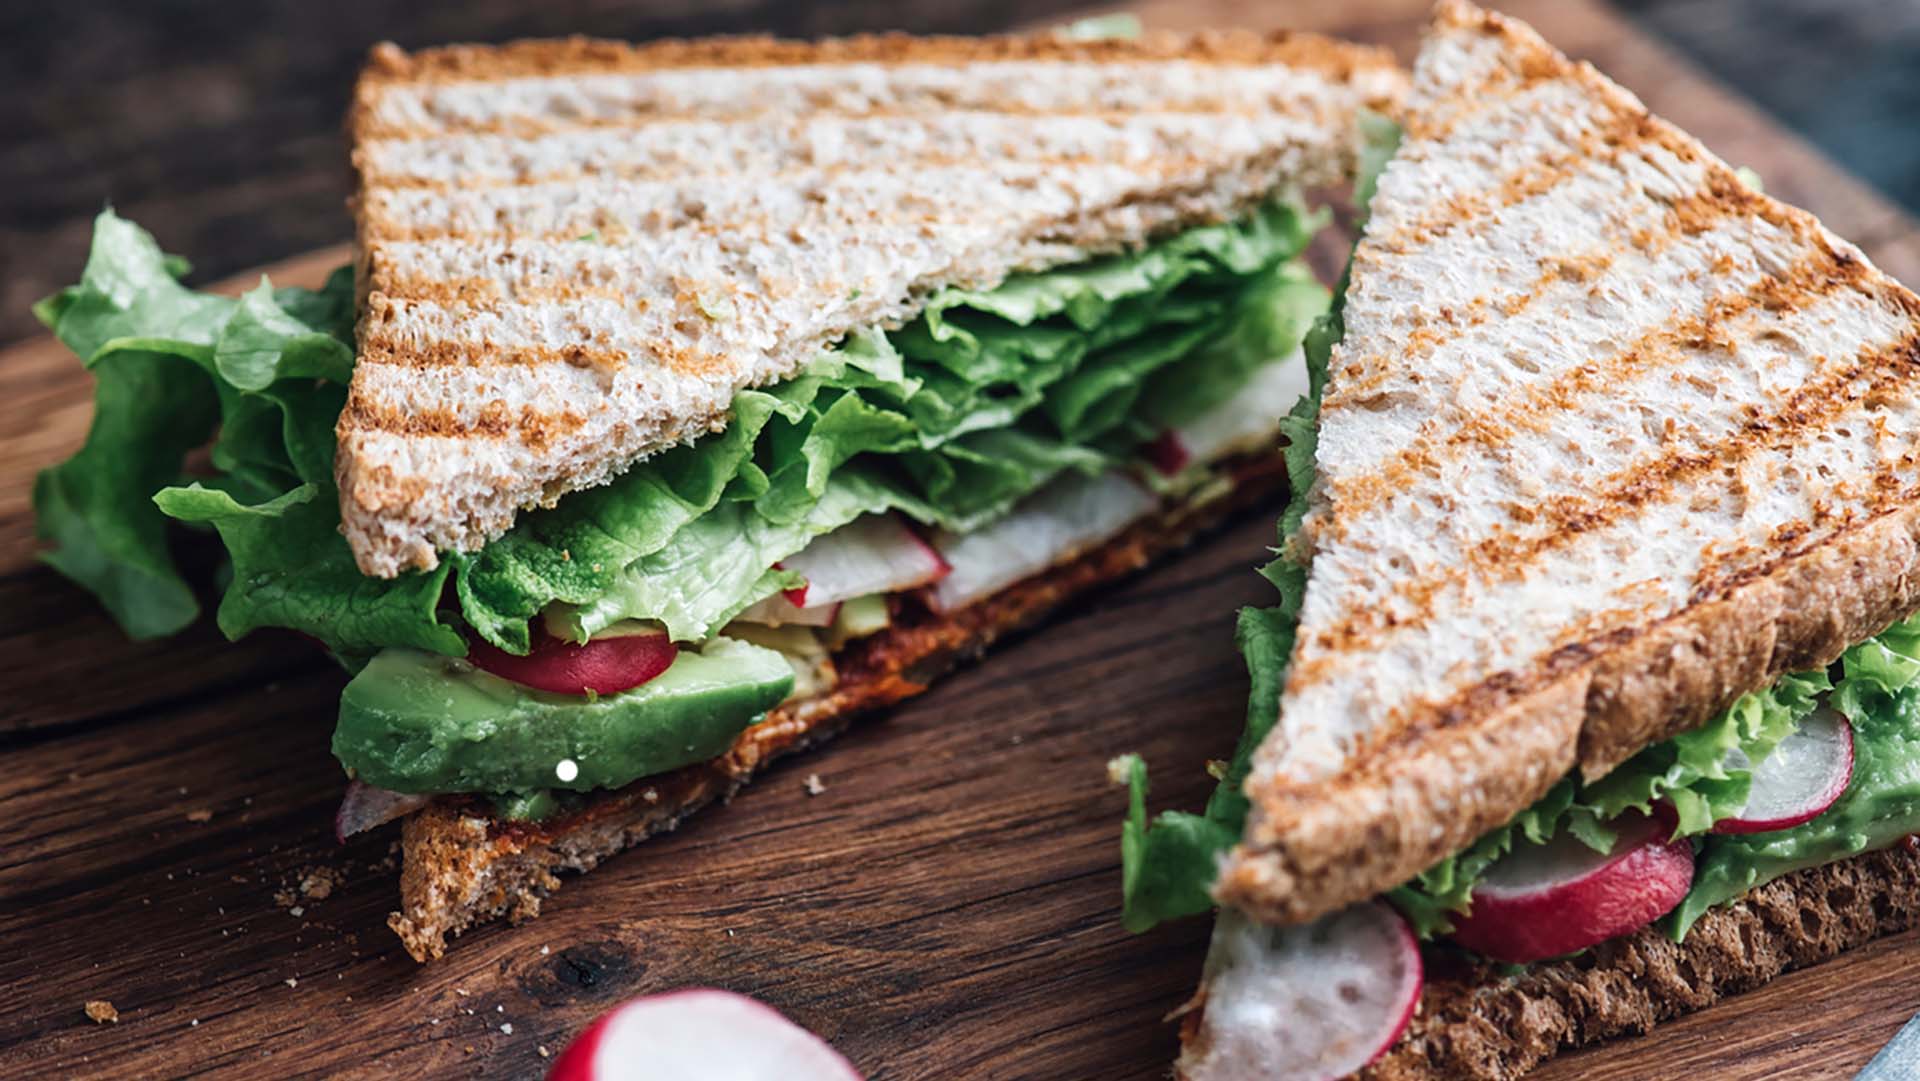 Healthy ideas for lunch: sandwich with avocado, radish and salad